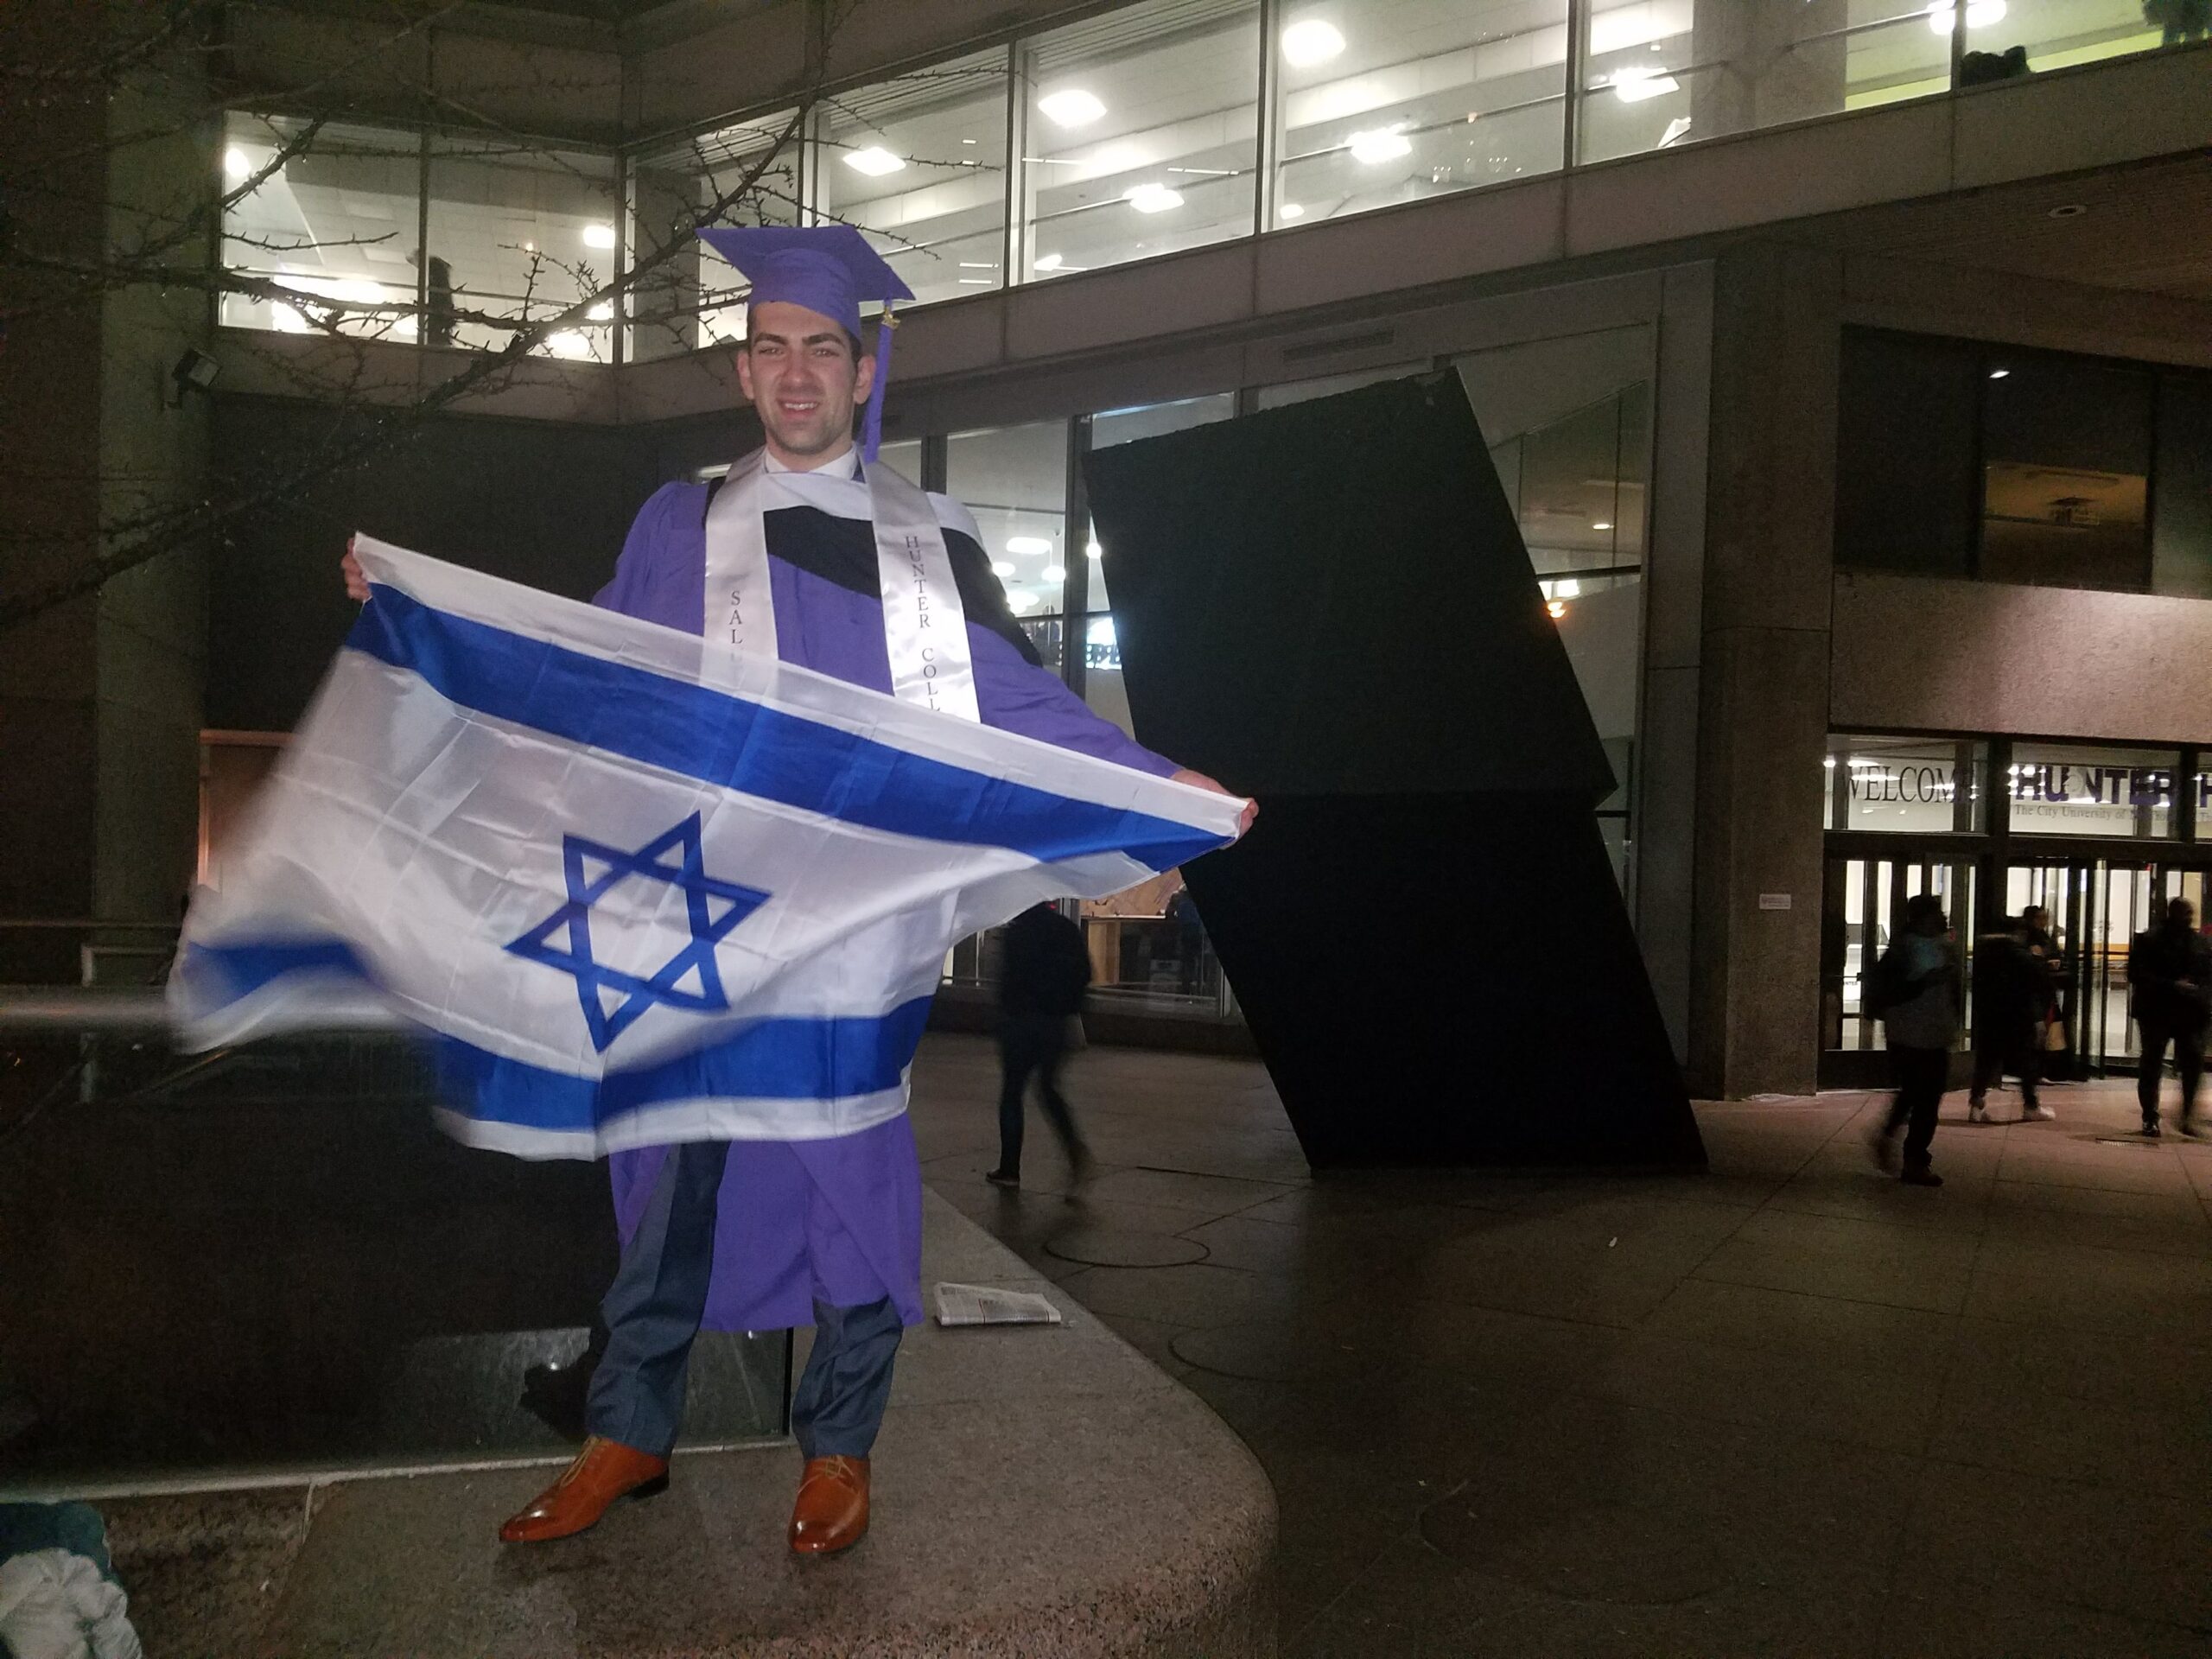 Charles waving his Israeli flag with pride at his college graduation, where the anti-Semitic rally took place.